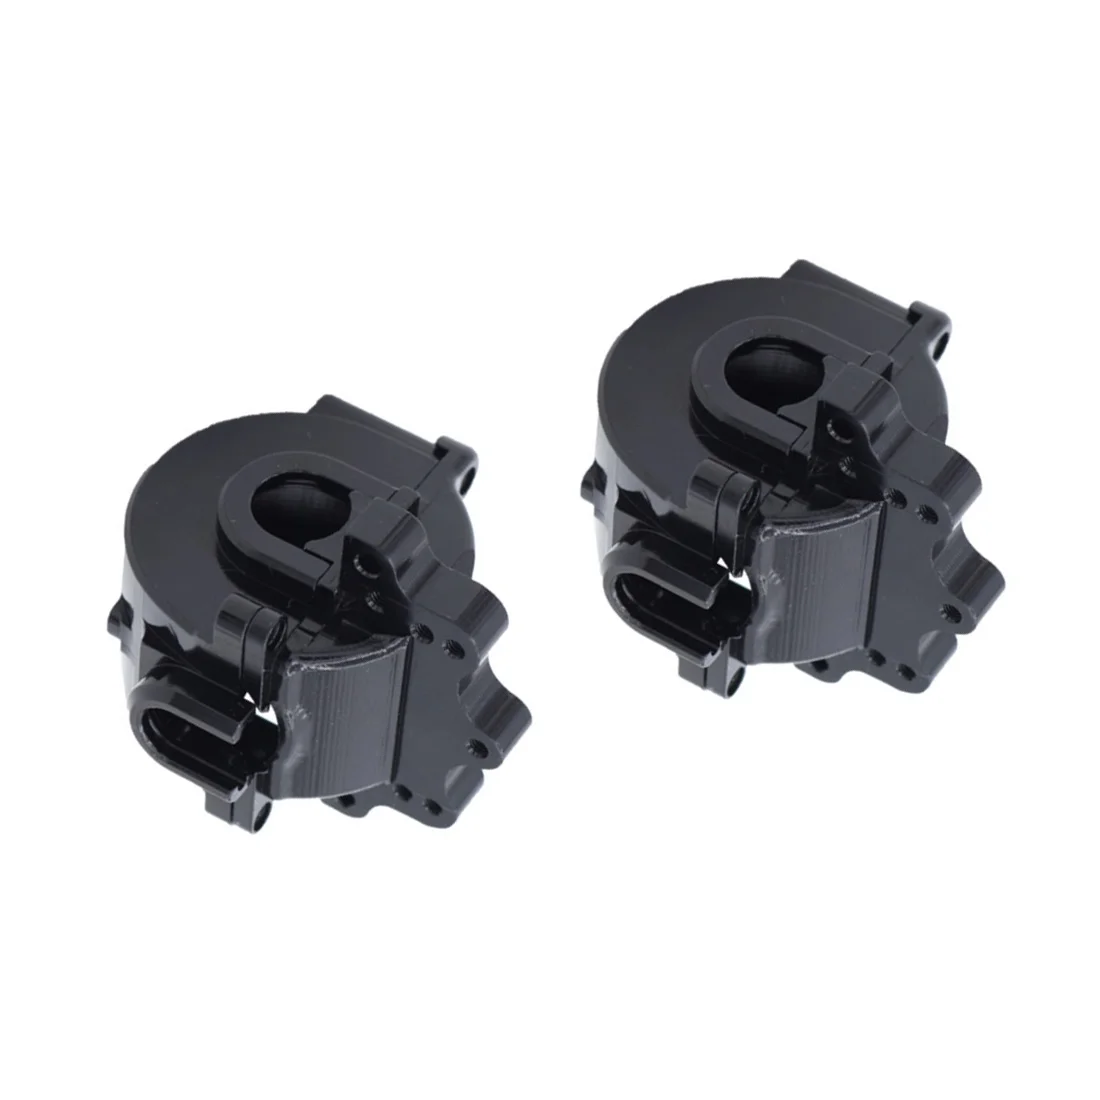 

2Pcs Metal Front and Rear Gearbox Housing for SG 1603 SG 1604 SG1603 SG1604 UD1601 UD1602 1/16 RC Car Upgrade Parts,2